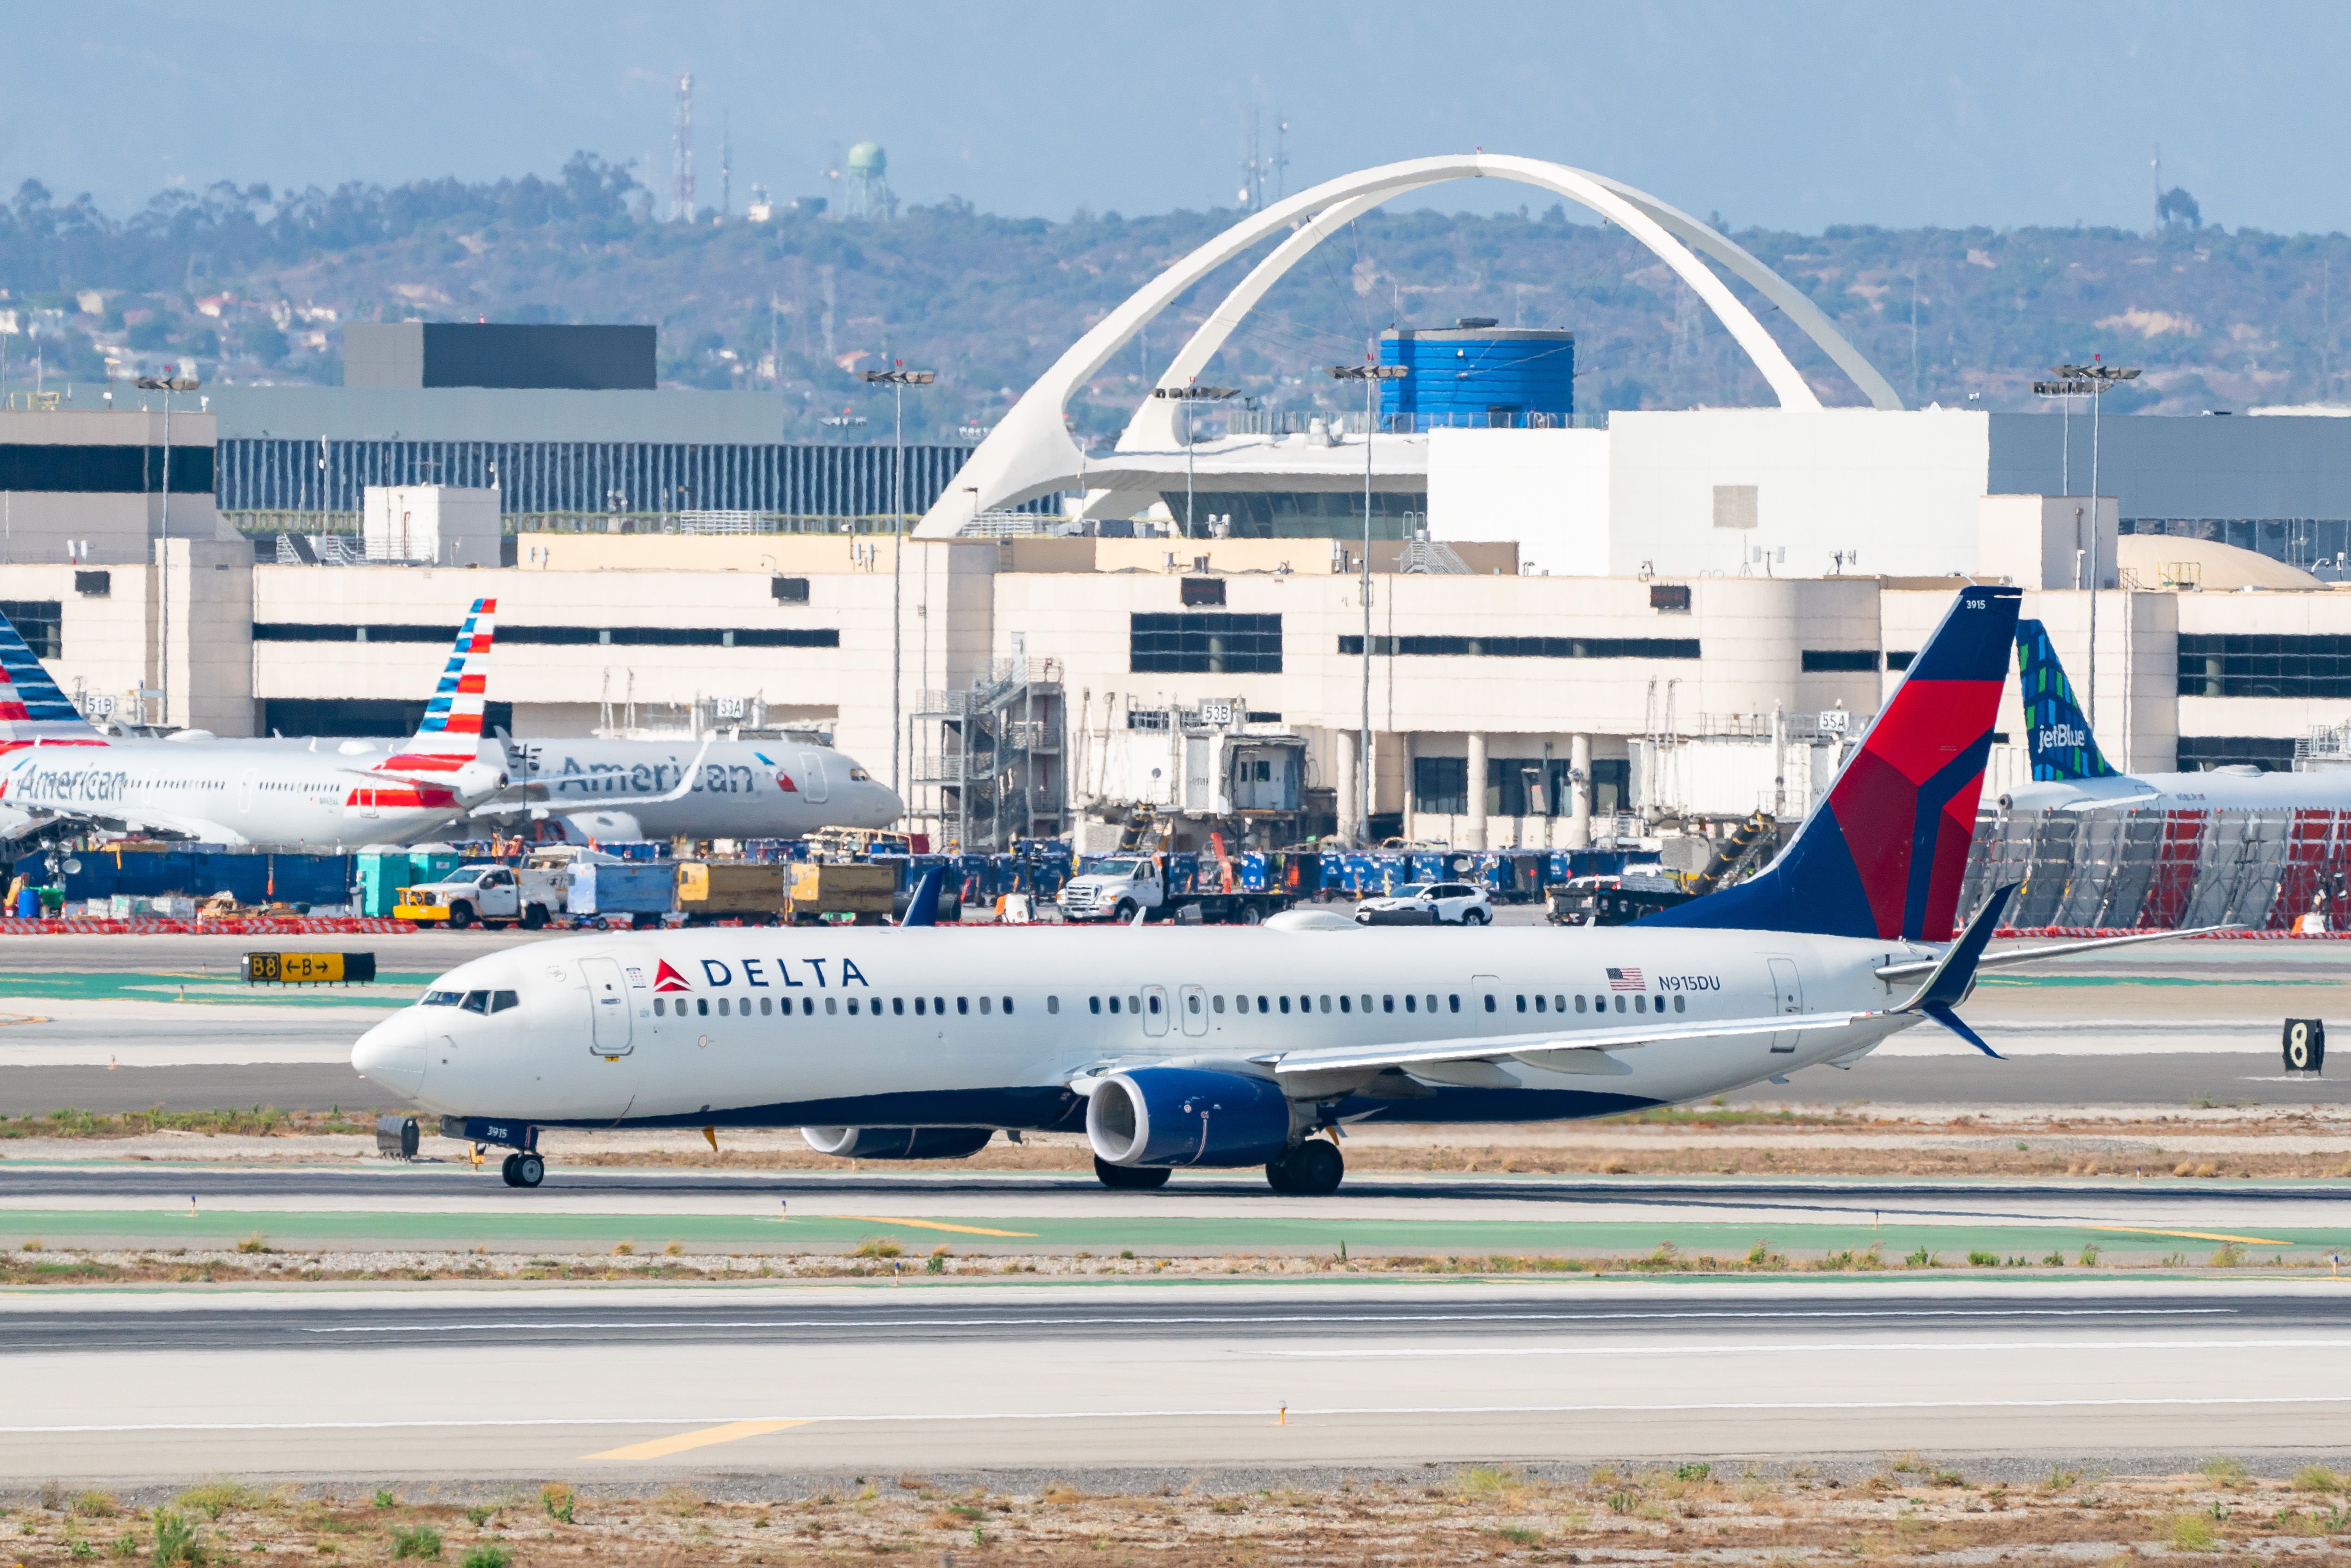 Delta Airlines Boeing 737-900ER arrives at Los Angeles international Airport on July 30, 2022 in Los Angeles, California.